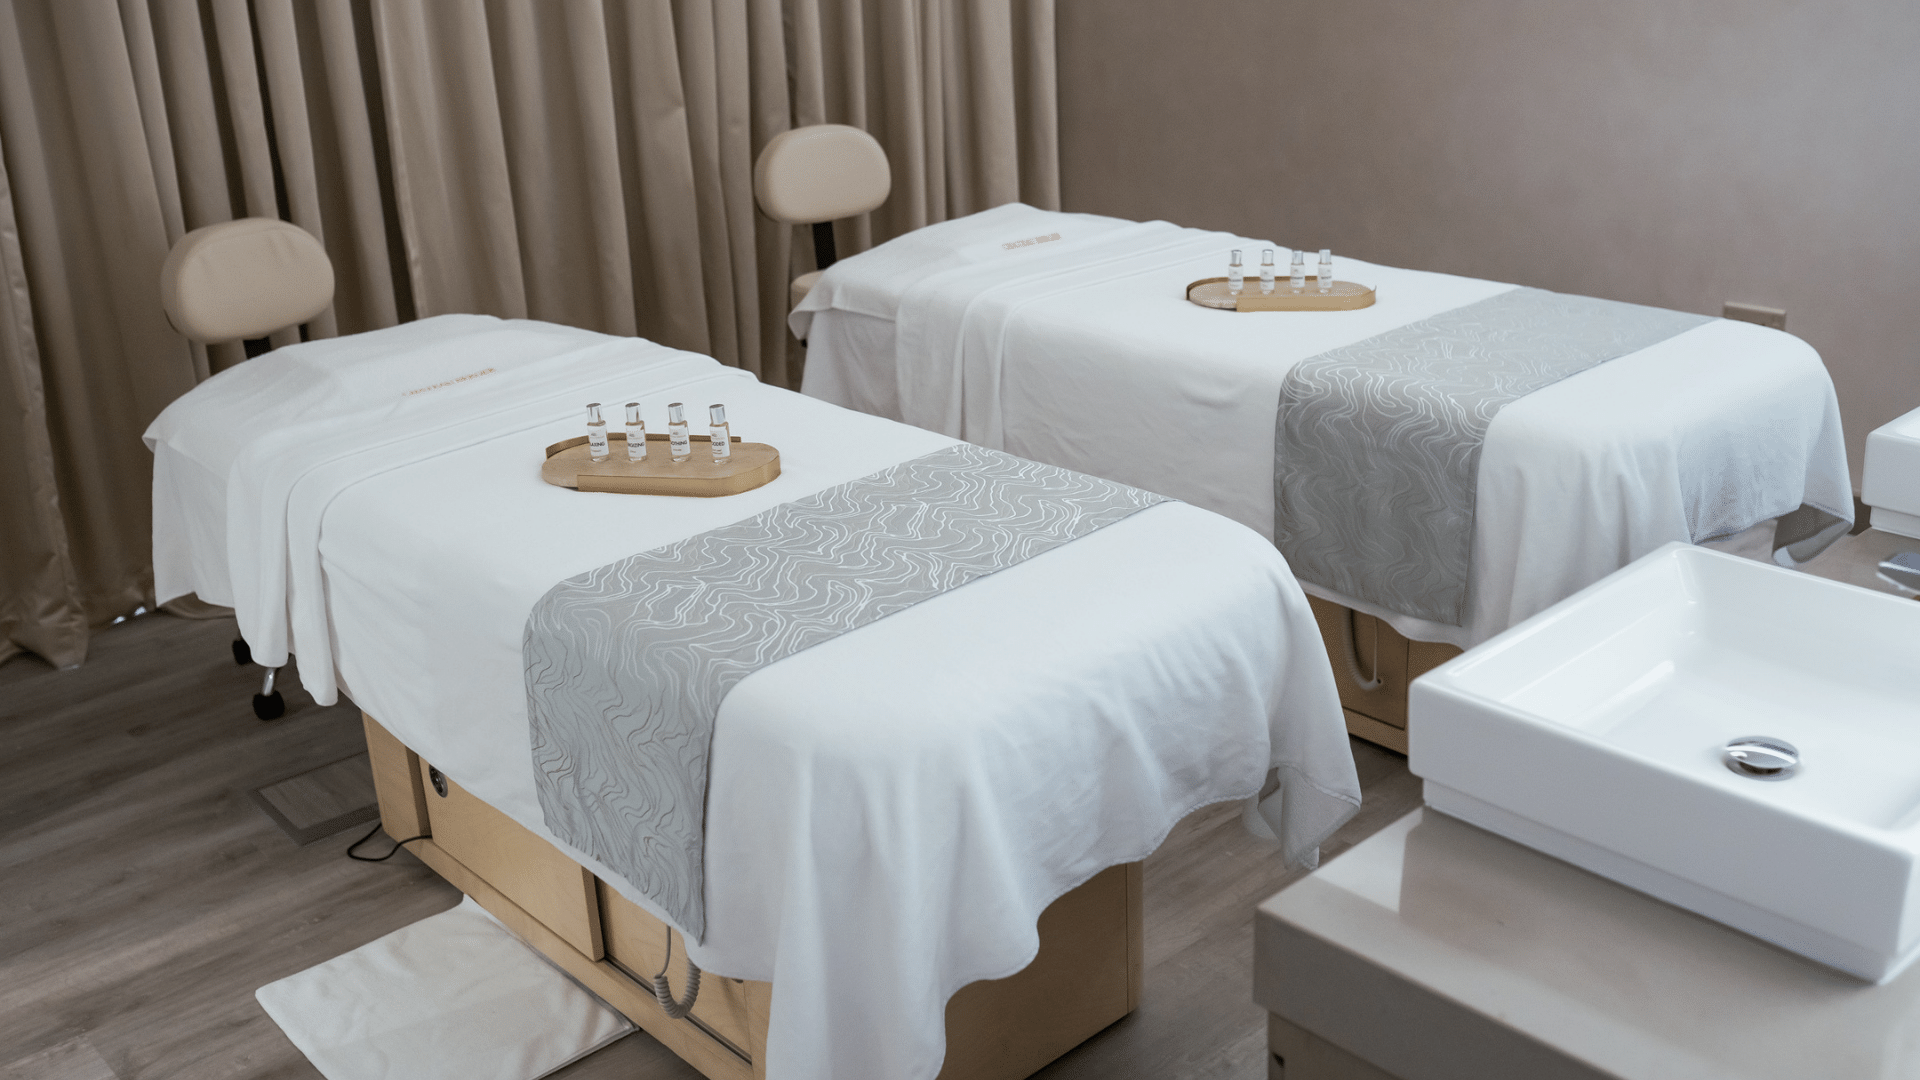 Beds and amenities in Pause Spa Château Berger at Paramount Hotel Midtown